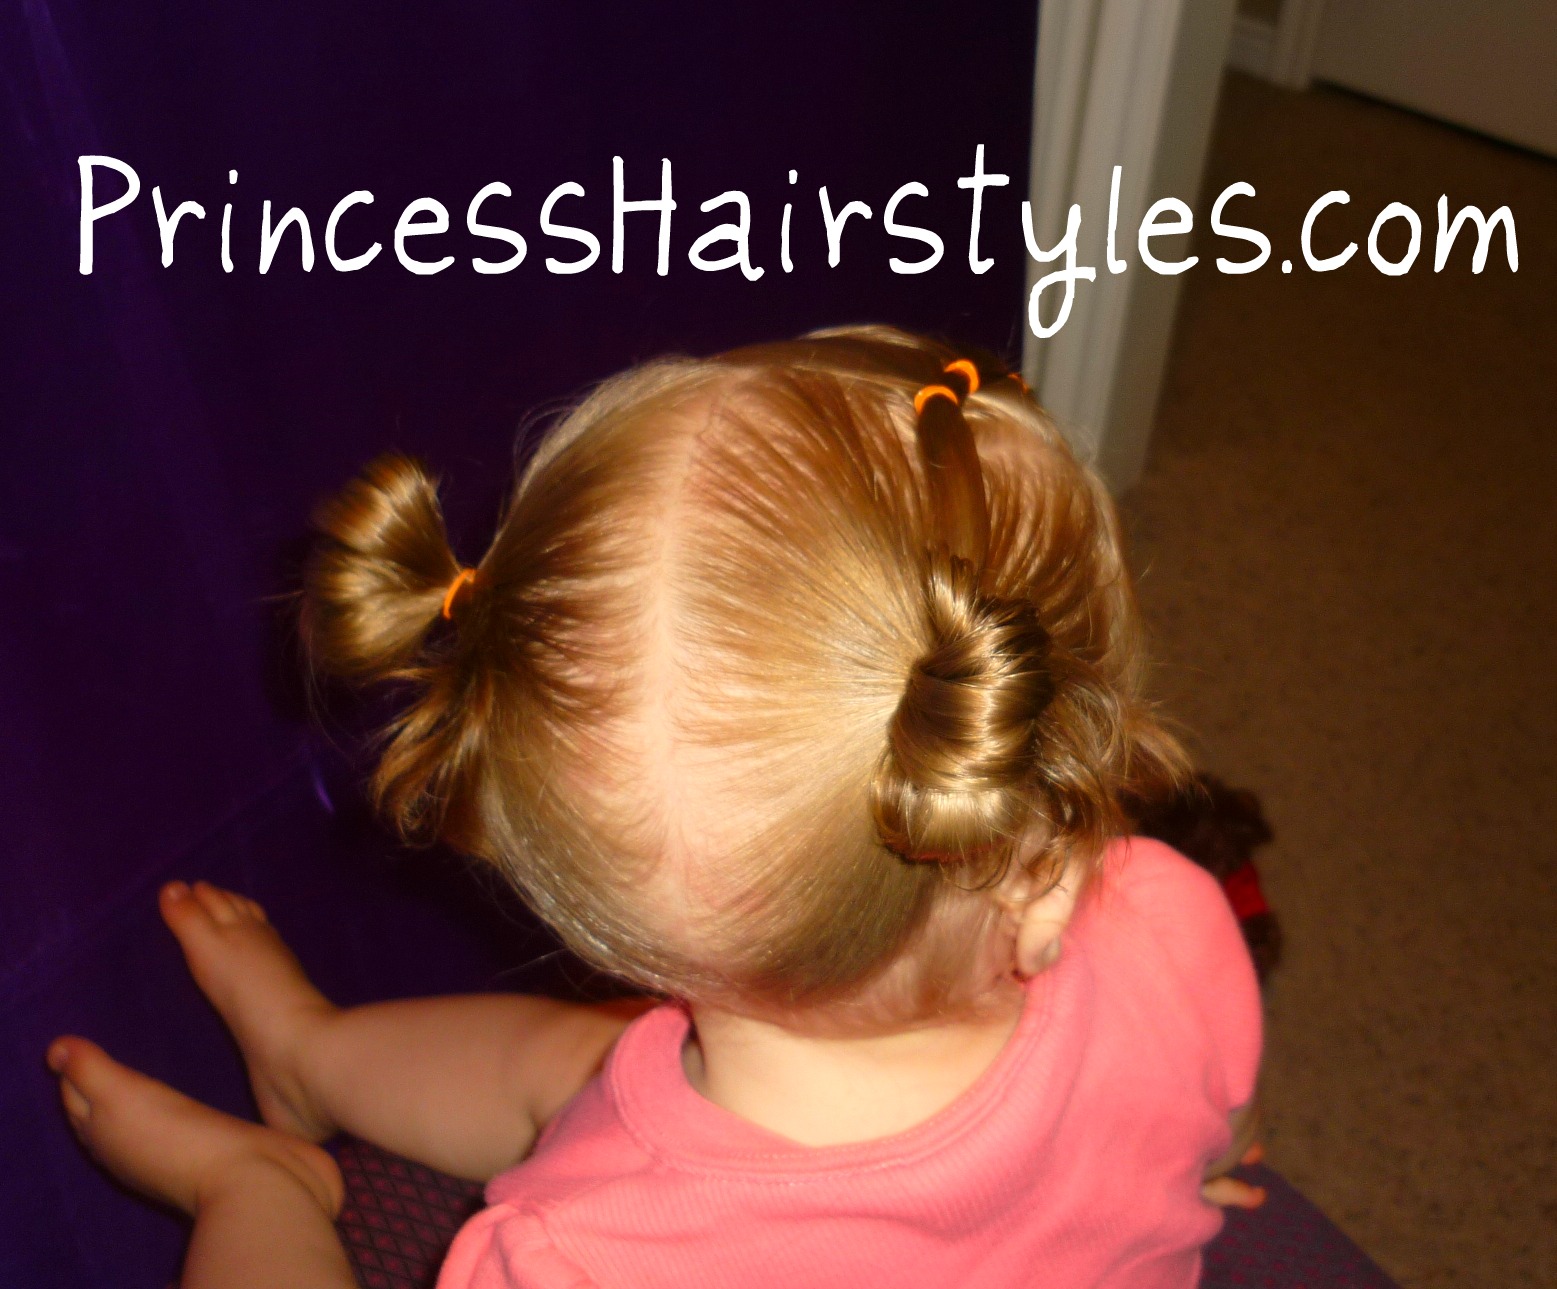 Toddler Hairstyles, Elastic Braid Pigtails | Hairstyles For Girls ...